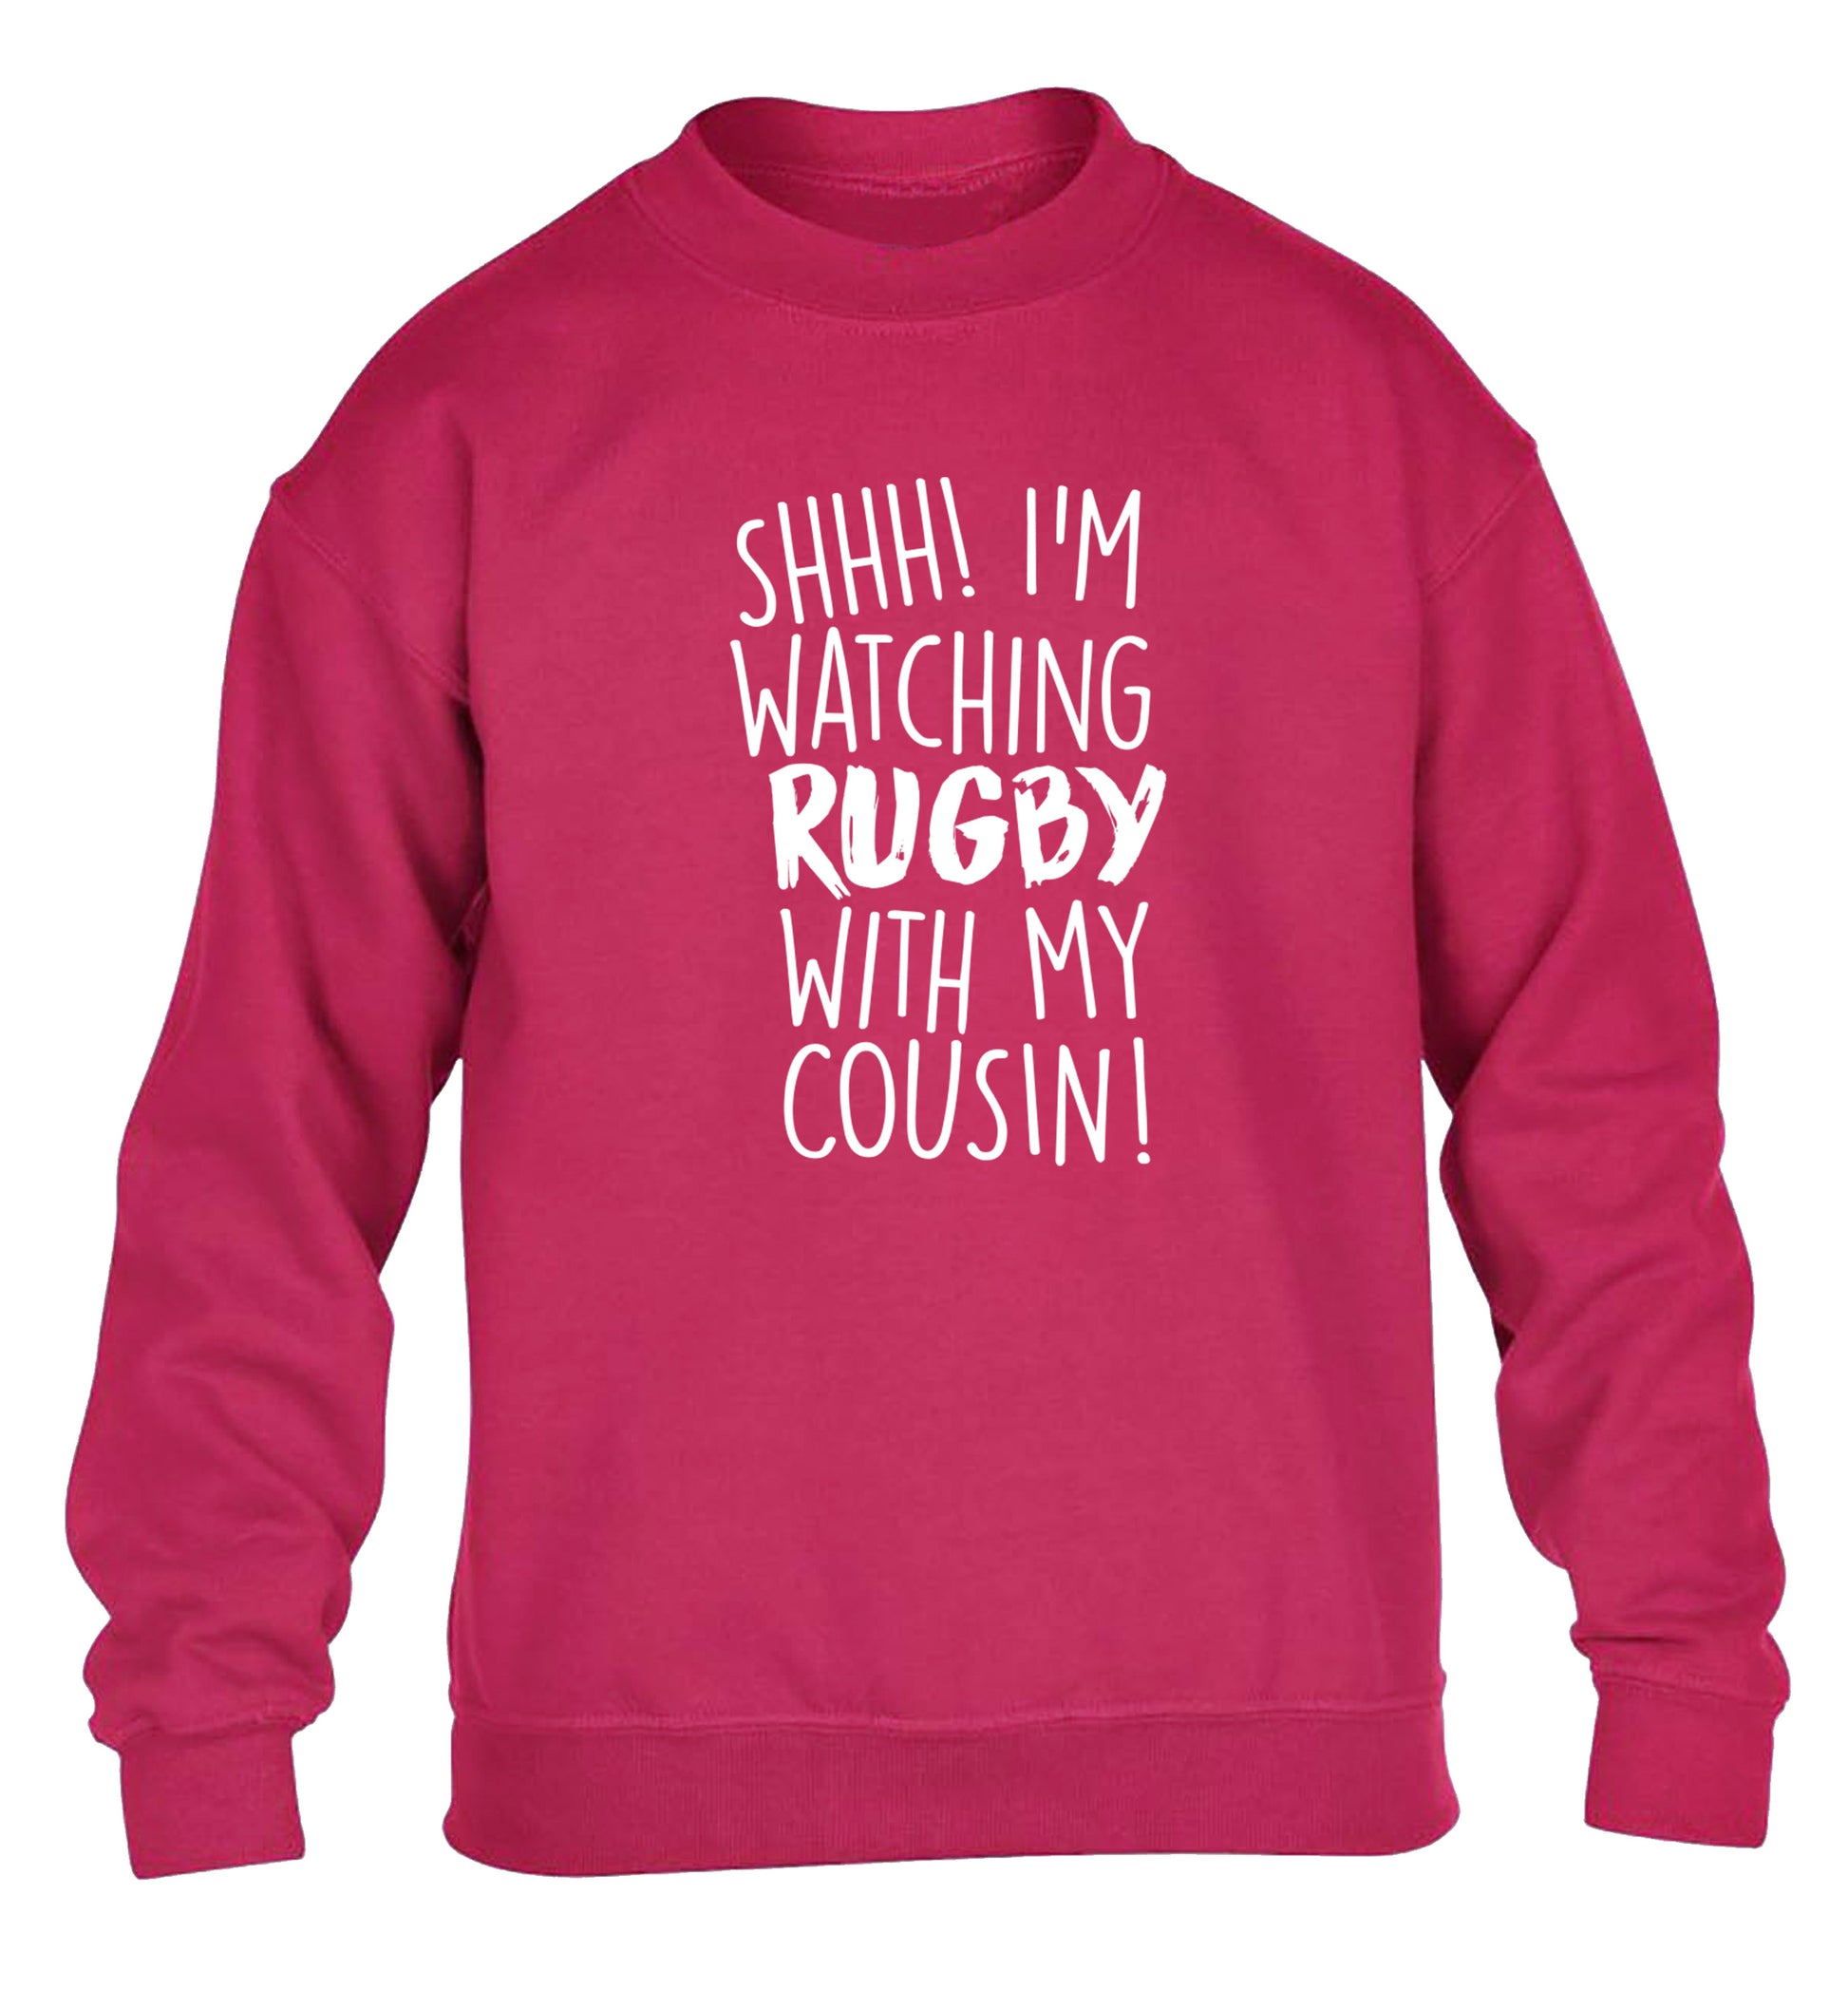 Shhh I'm watching rugby with my cousin children's pink sweater 12-13 Years